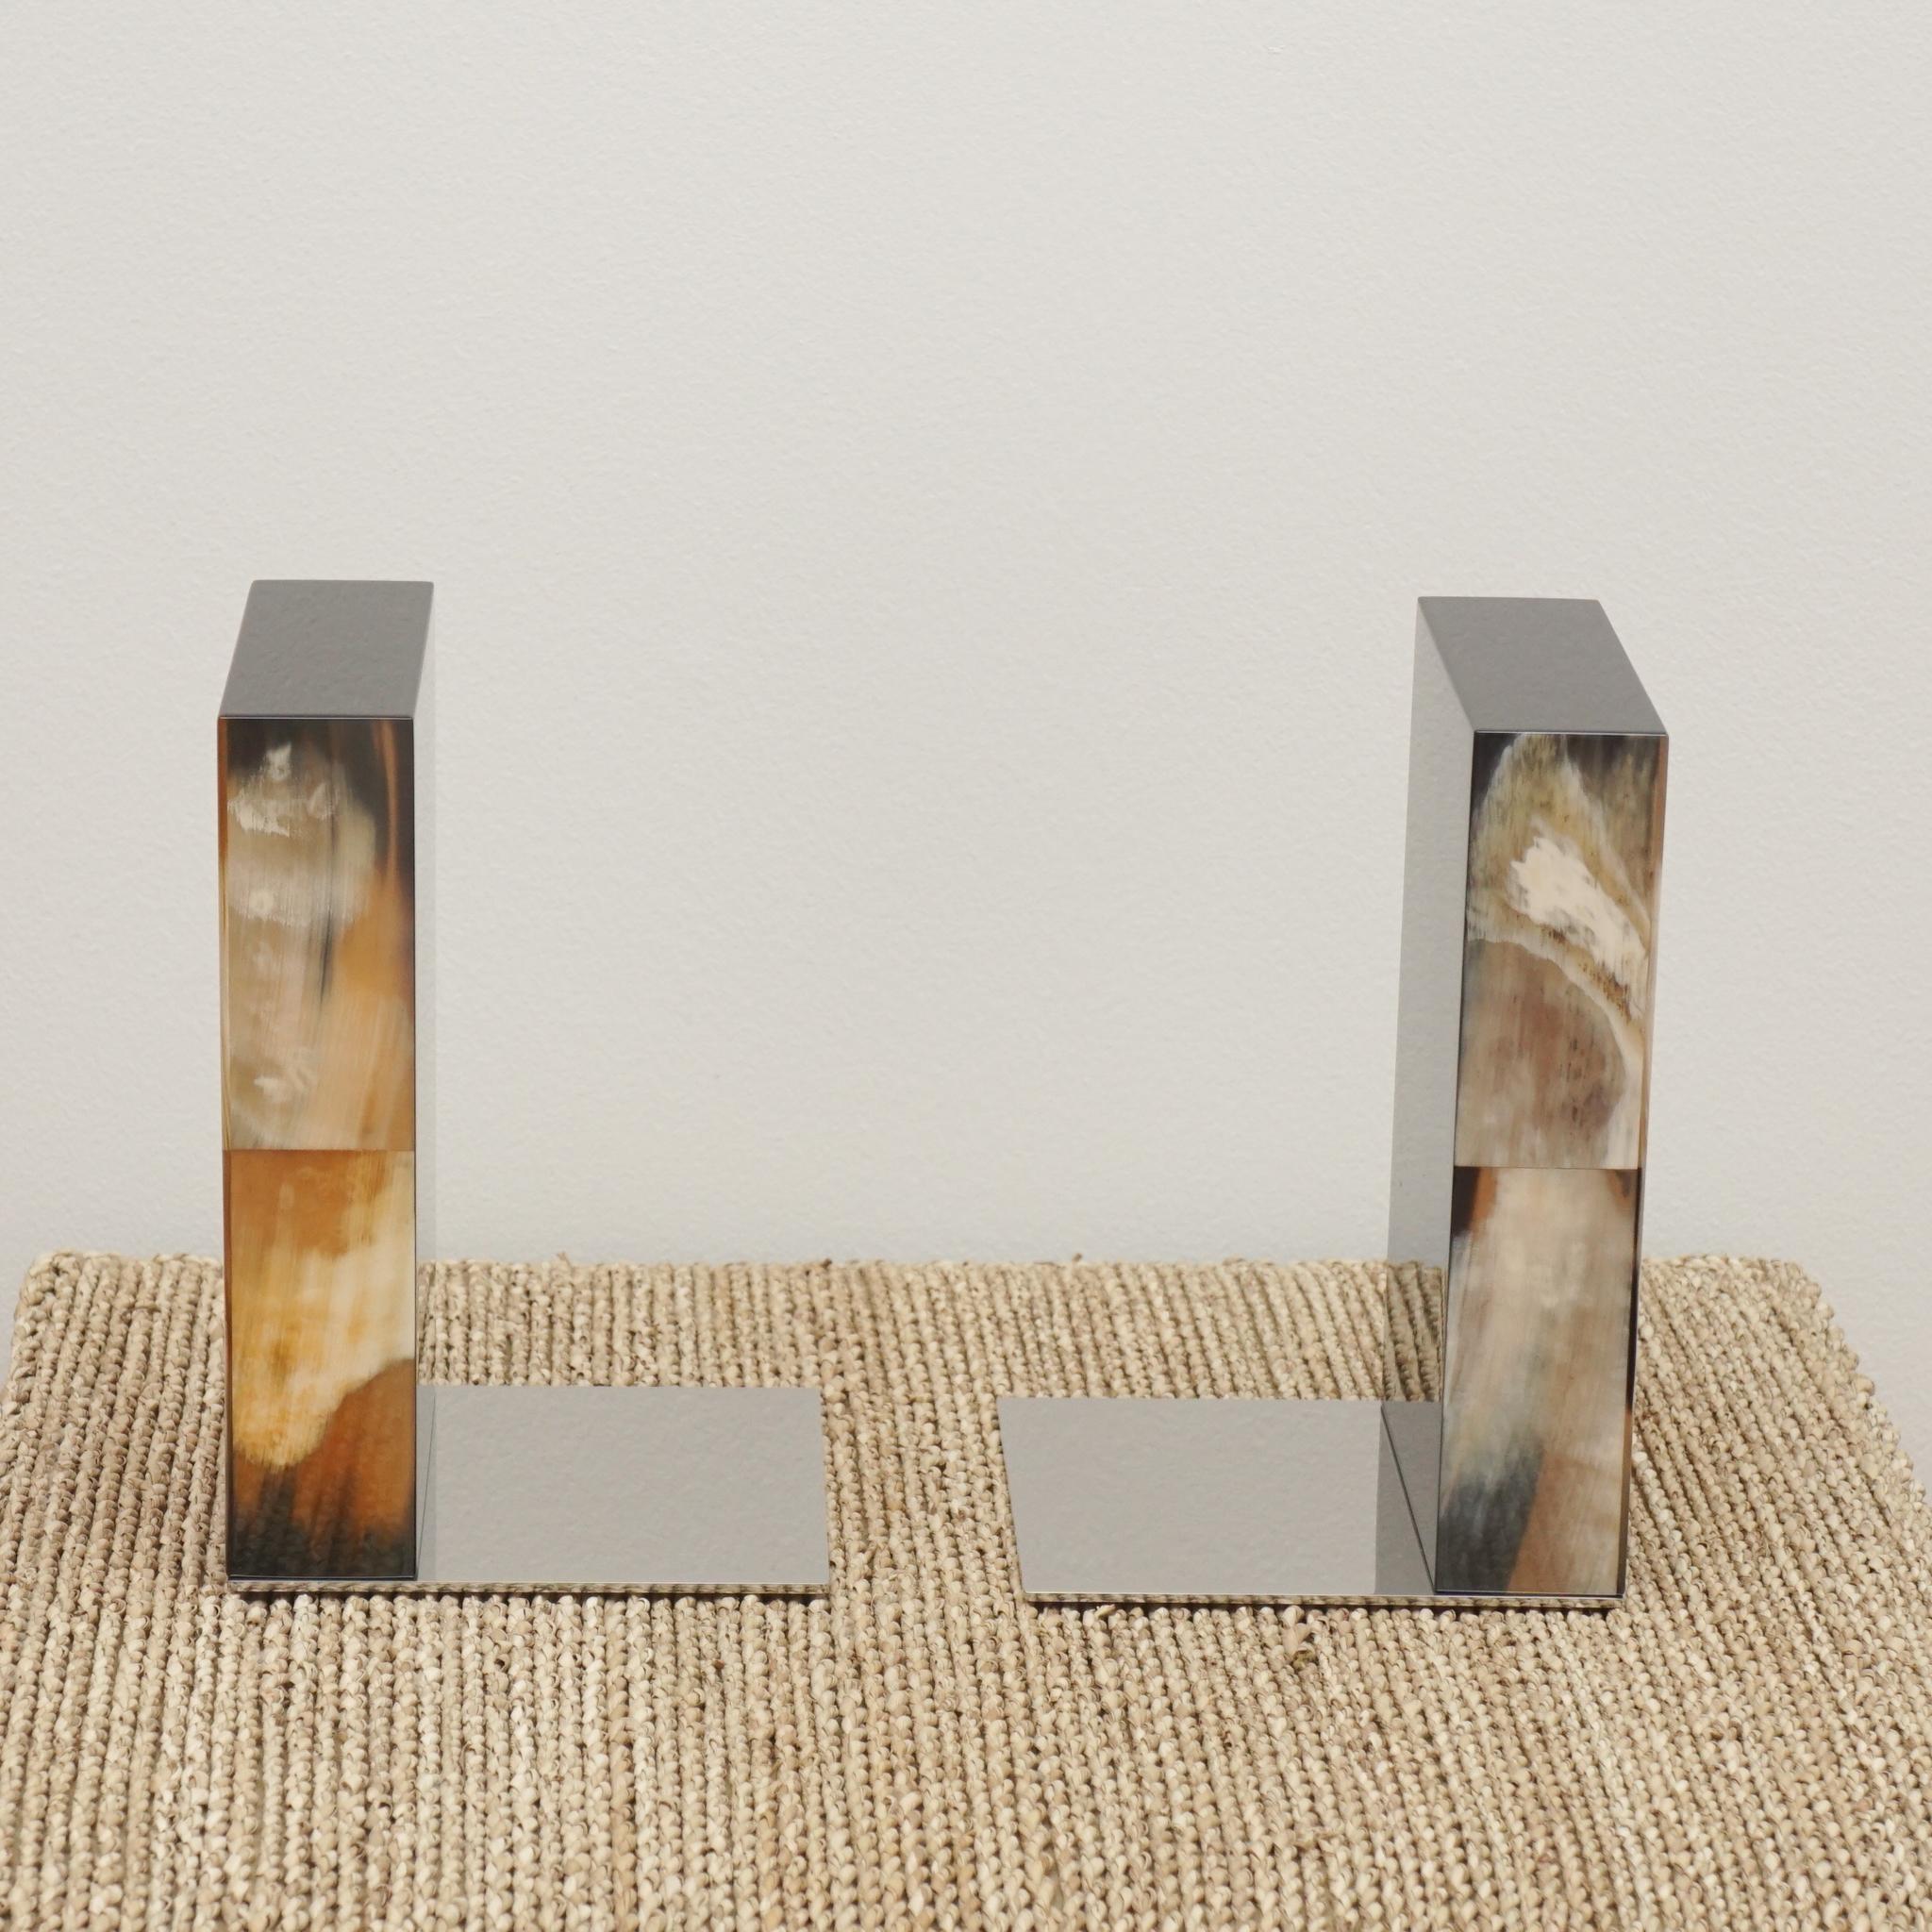 The Igor bookends, shown here from Arcahorn, reflect the company's tradition of combining natural materials and intricate craftsmanship to create luxury goods. The bookends are handcrafted from light cow horn and wood with ivory gloss finish. The